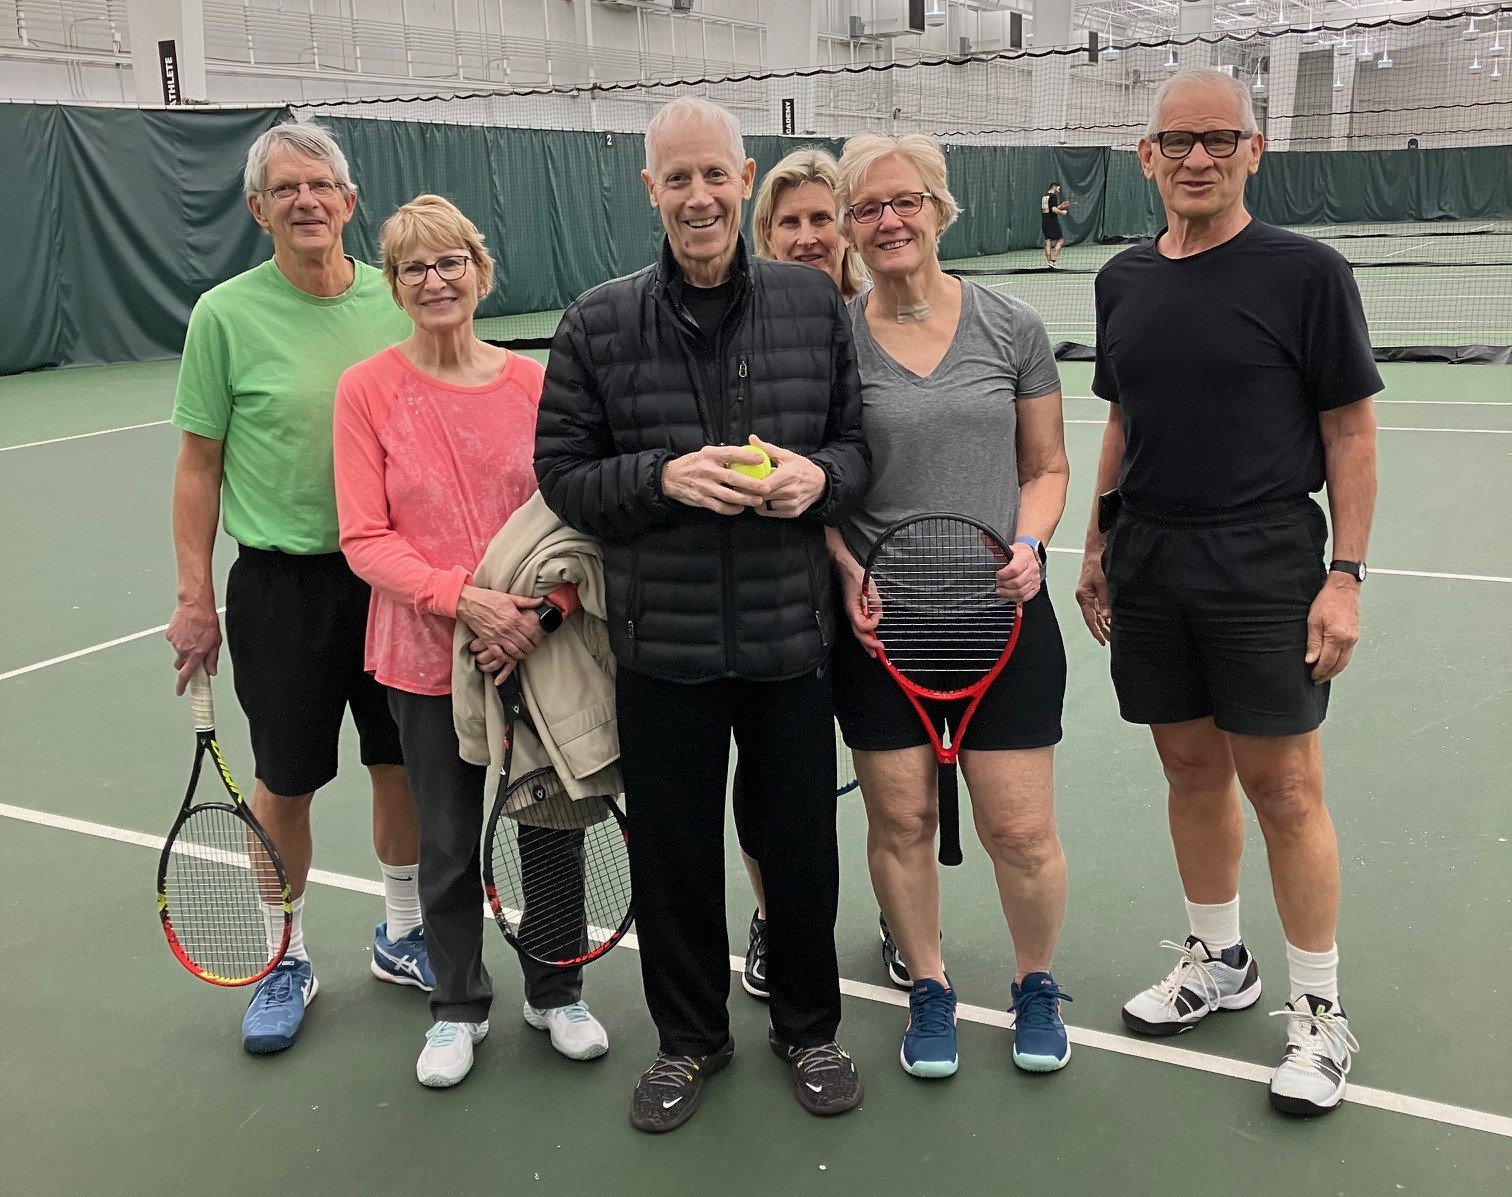 Photo of Coach Dan Steiner with Tom and others on the tennis court.